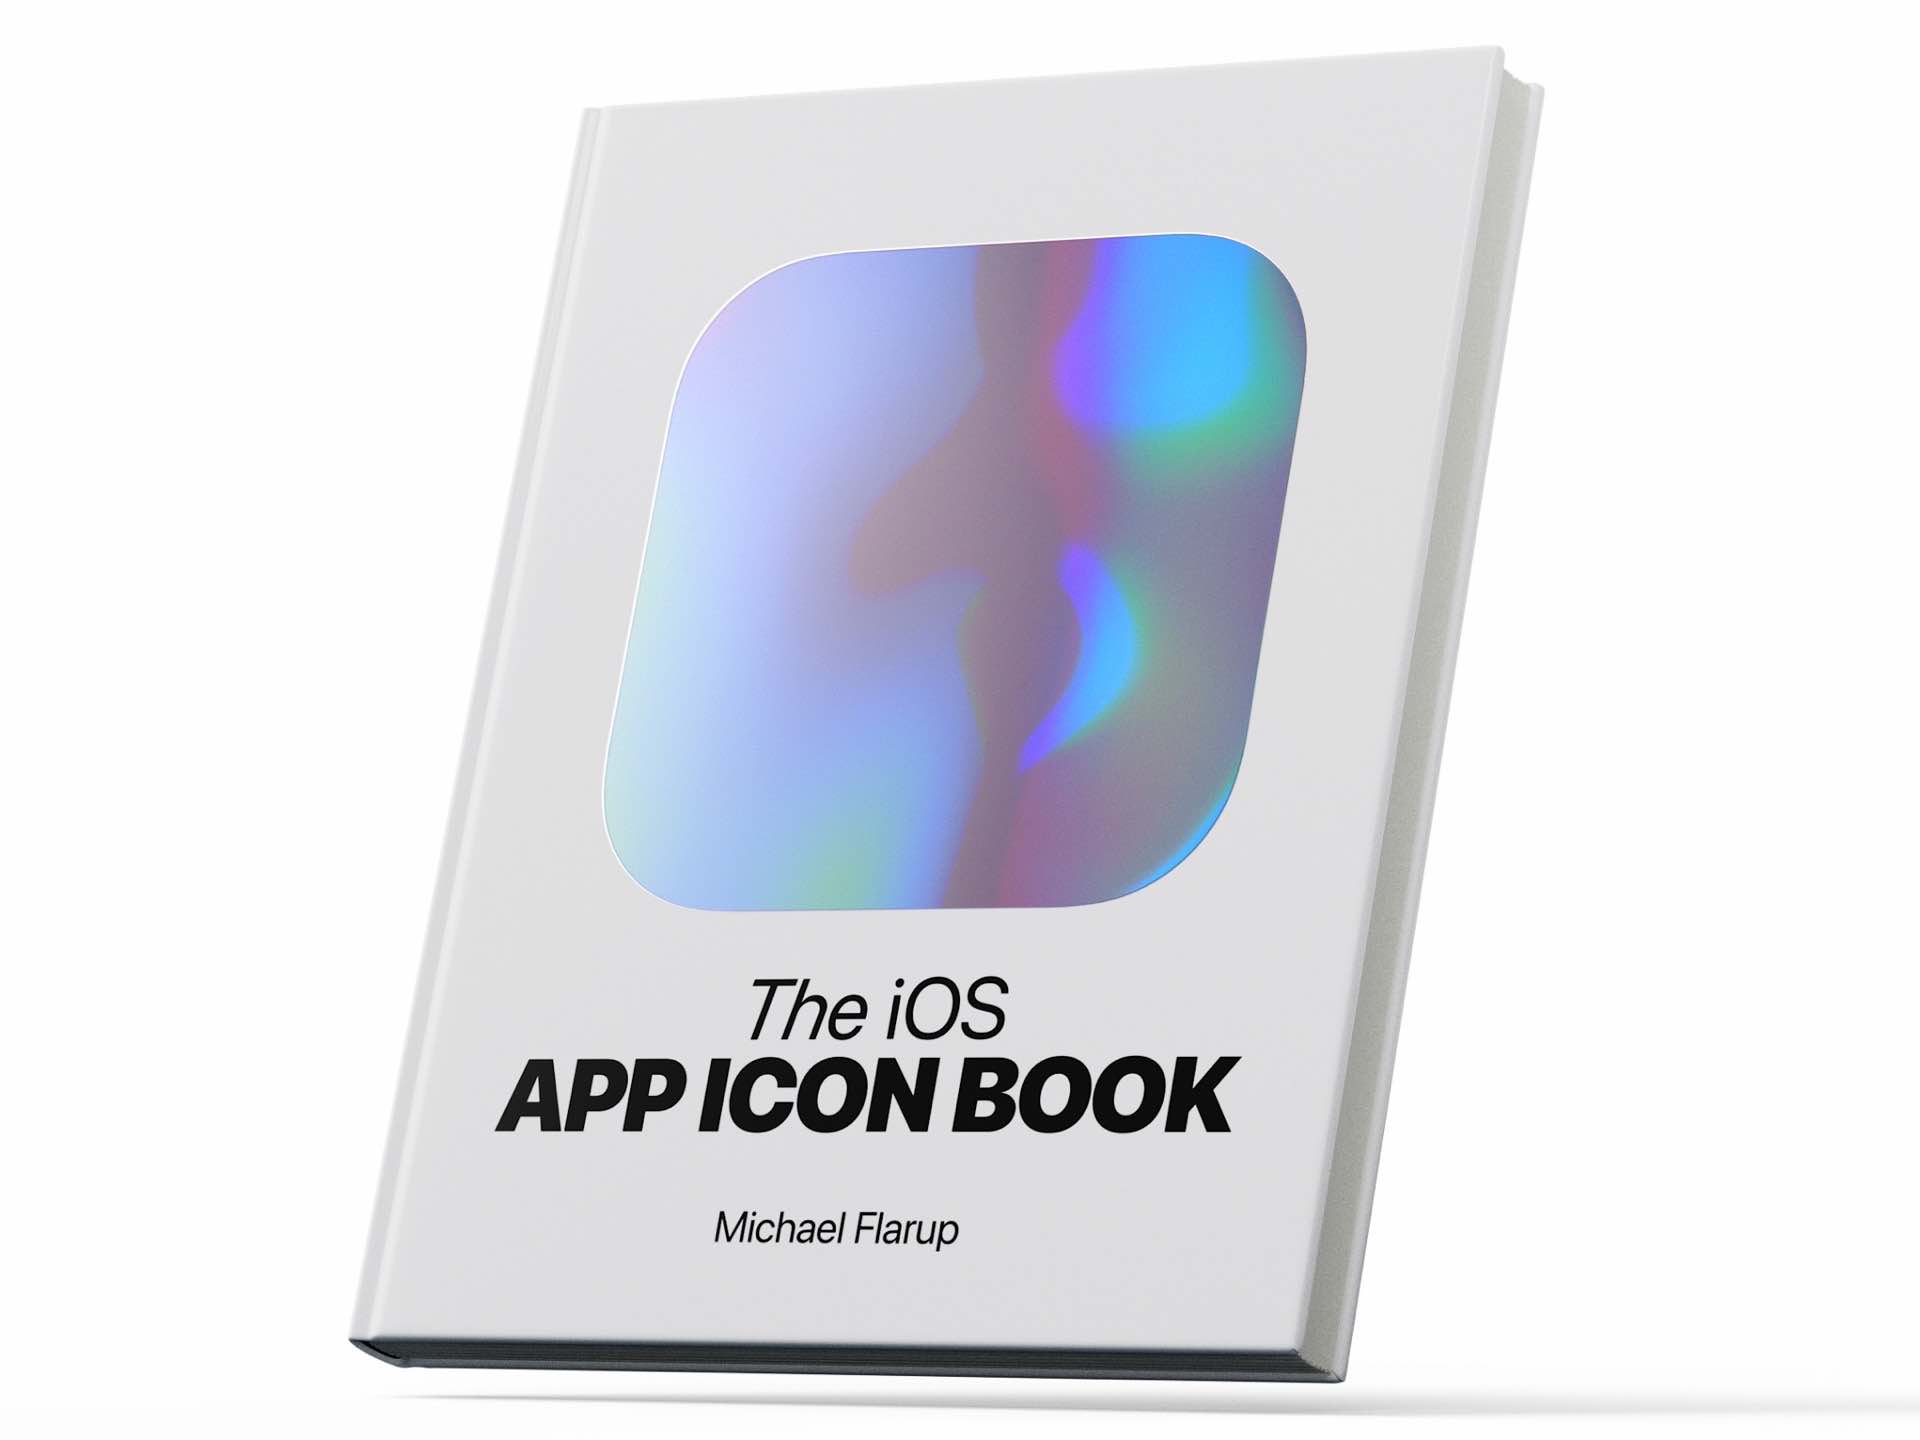 the-ios-app-icon-book-by-michael-flarup